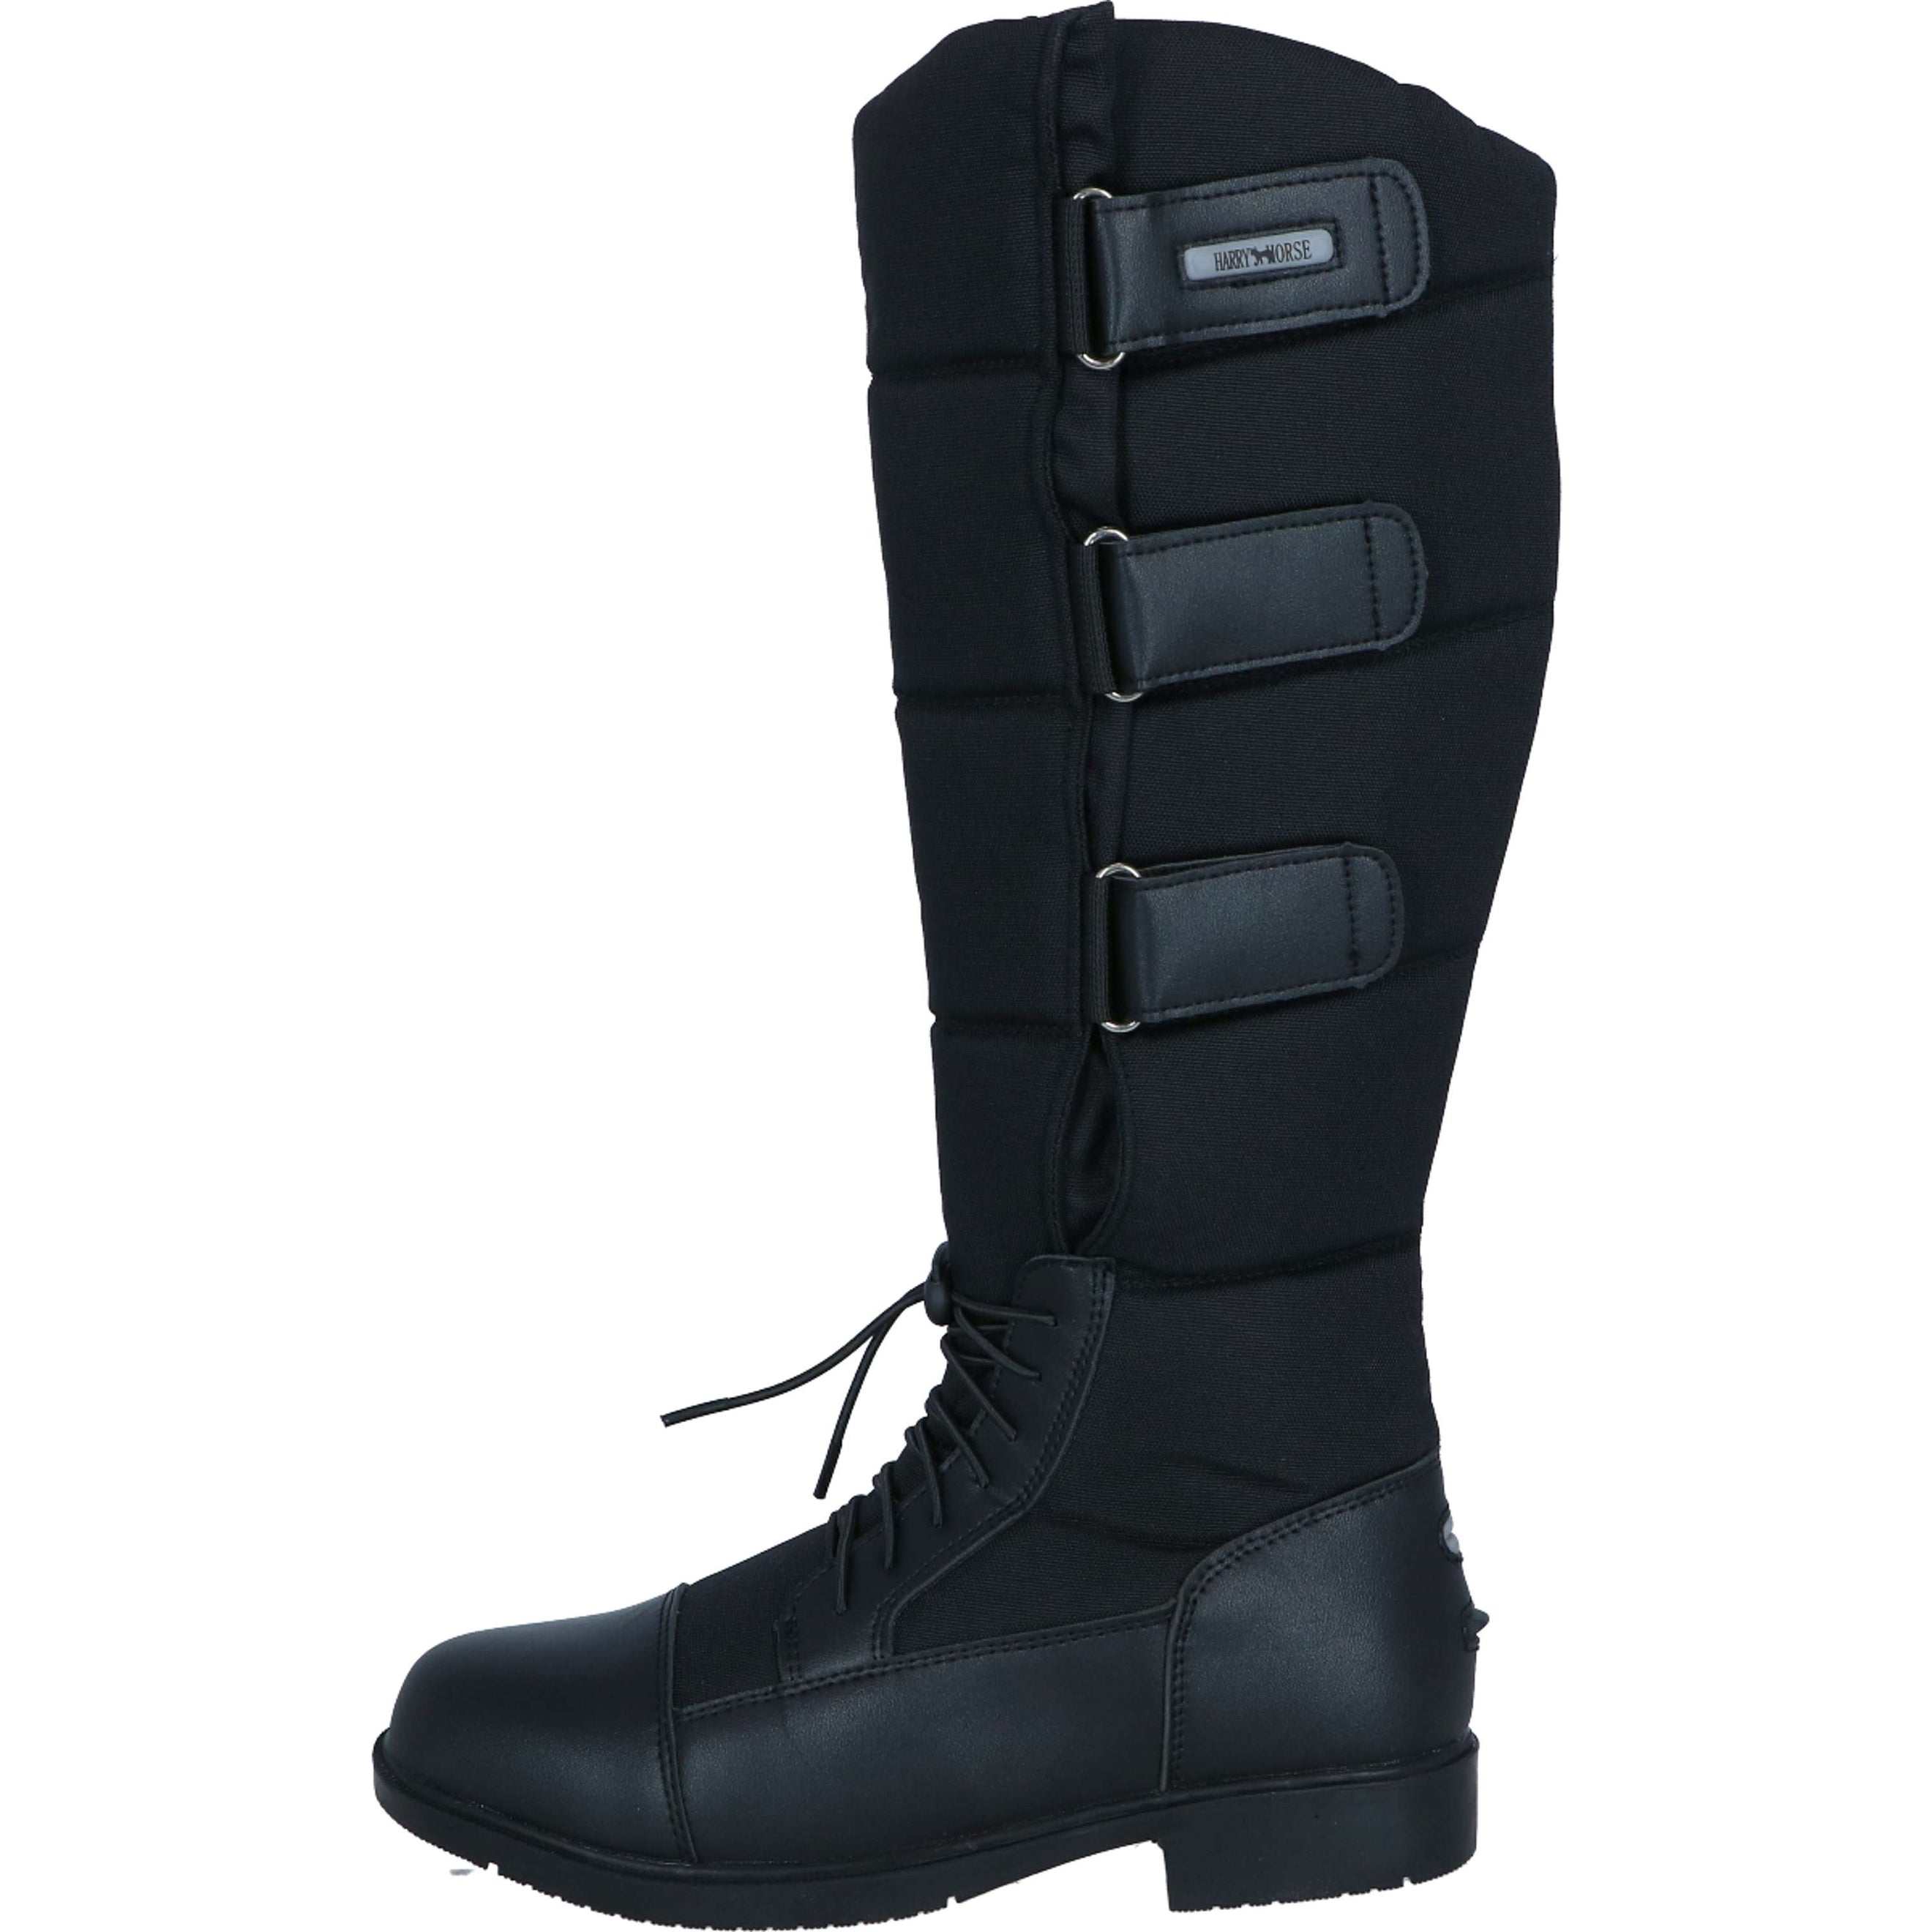 Harry's Horse Botte Thermique Thermo-Rider Noir